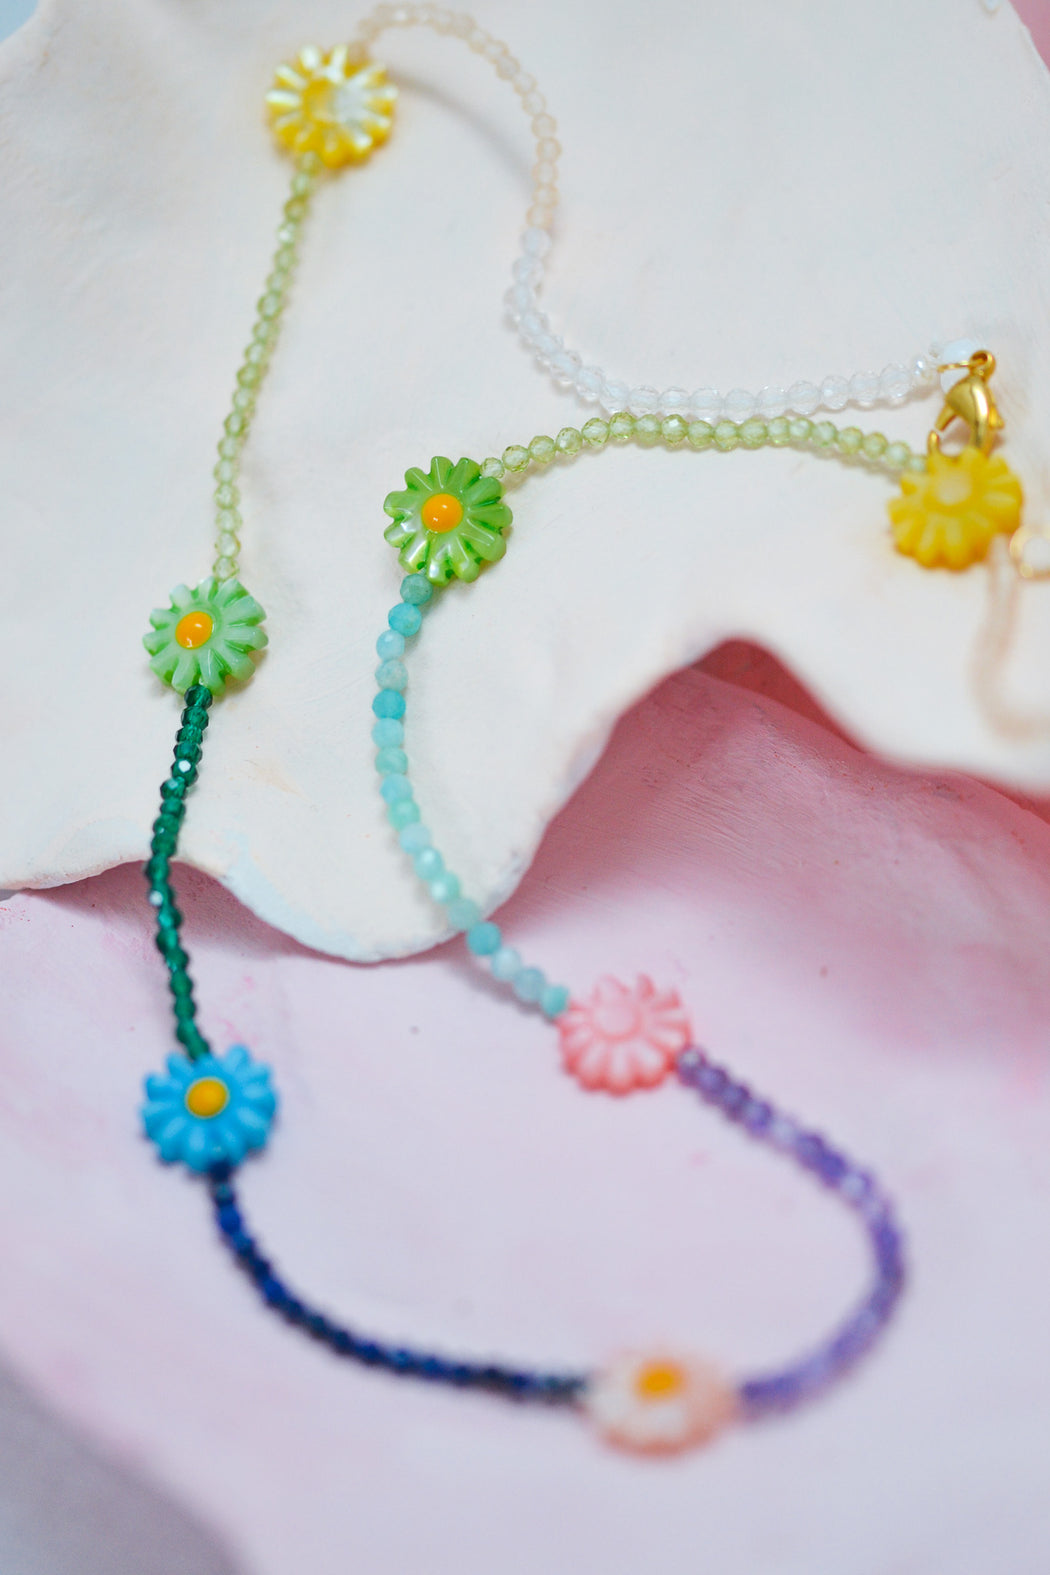 Meadow Of Delight necklace